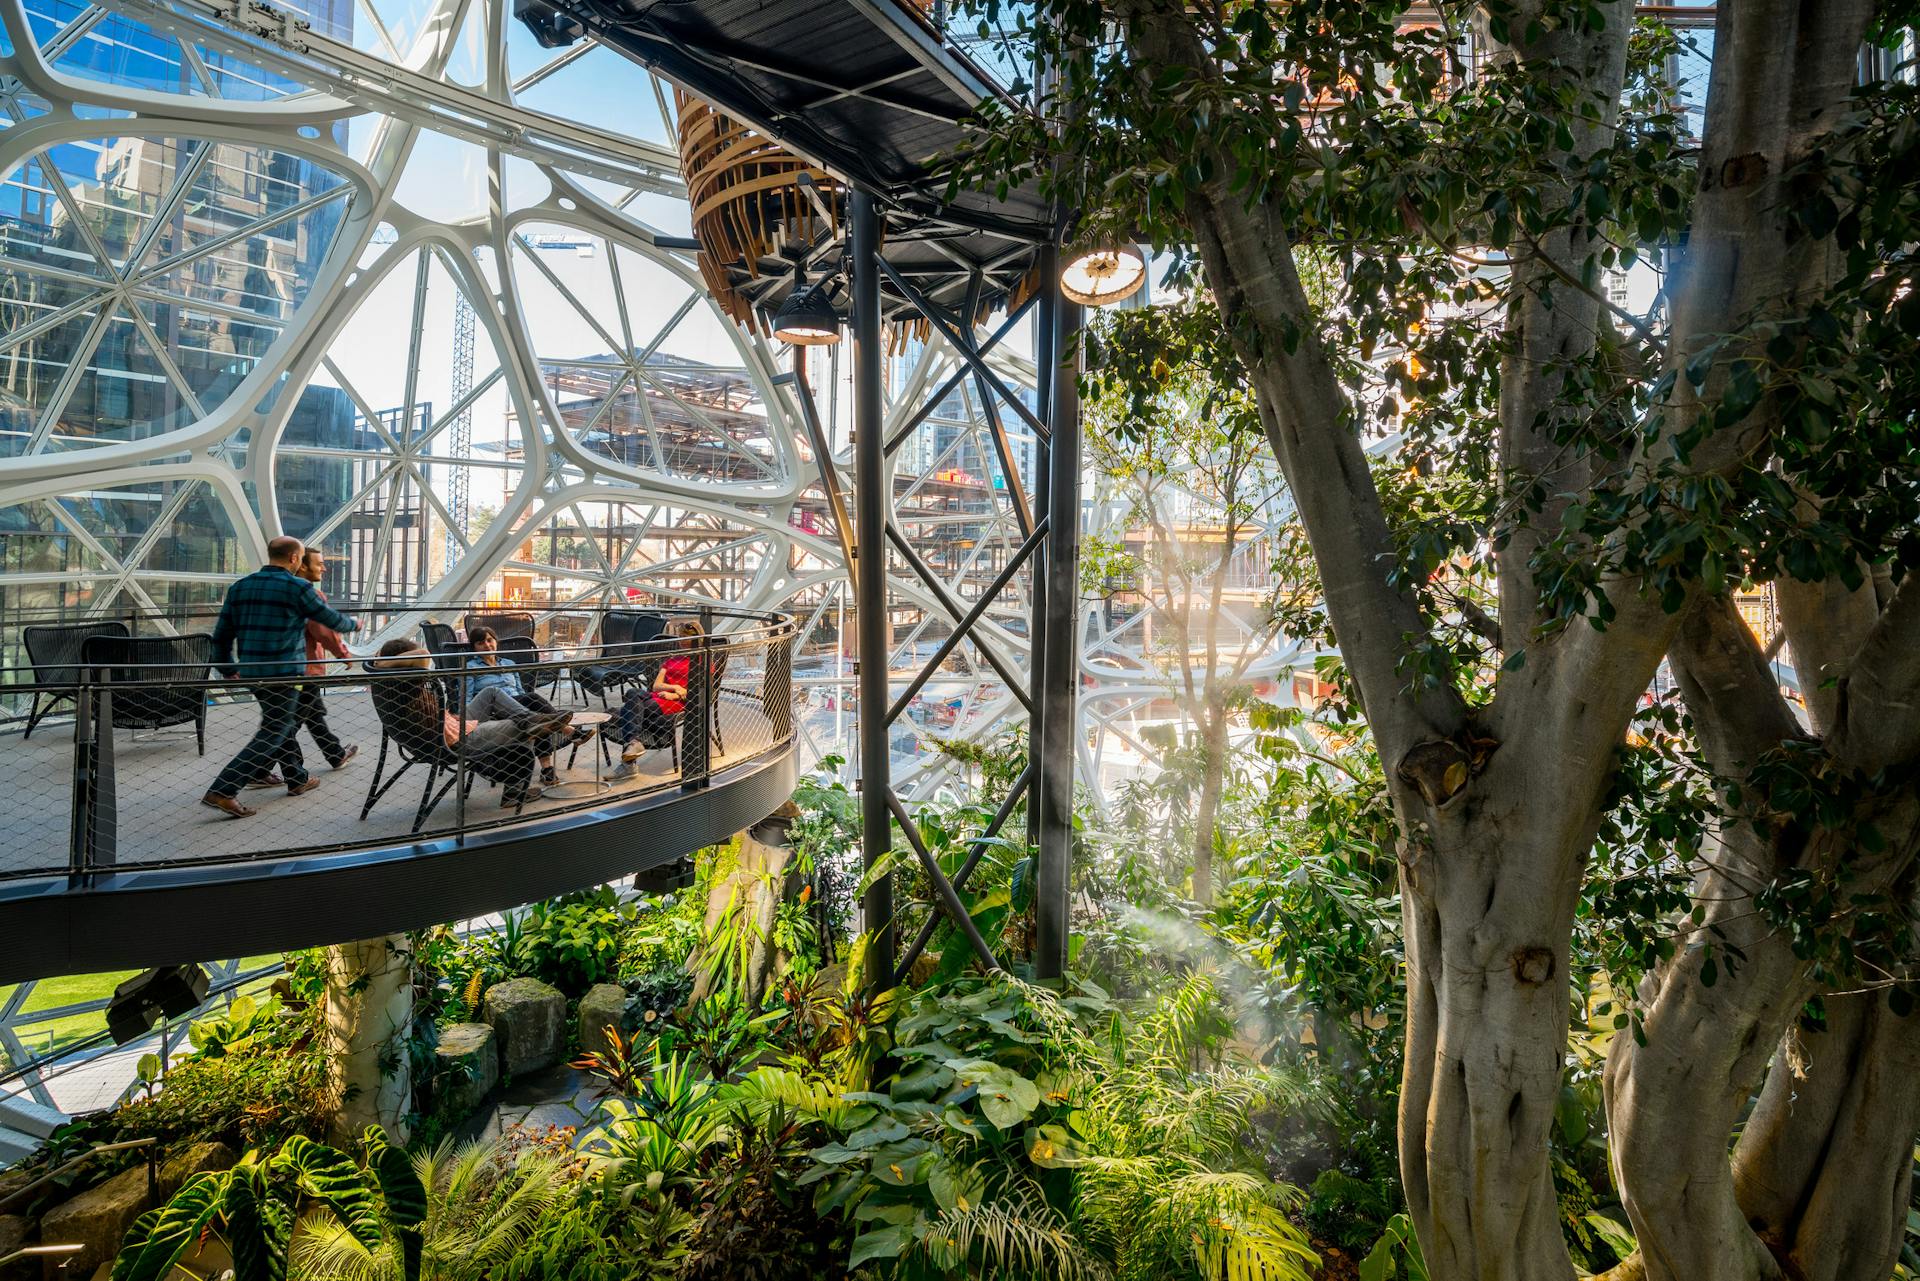 Photograph by Stuart Isett. ©2018 Stuart Isett. All rights reserved.

March 10th, 2018 — Seattle, WA, USA


The Amazon Spheres are three spherical conservatories on the headquarters campus of Amazon in Seattle, Washington, US. Designed by NBBJ, the three glass domes are covered in pentagonal hexecontahedron panels and serve as an employee lounge and workspace. The domes, which range from three to four stories tall, house 40,000 plants as well as meeting space and retail stores. They are located under the Day 1 building on Lenora Street. The complex opened to Amazon employees and limited public access on January 30, 2018. The spheres are reserved mainly for Amazon employees, but are open to the public through weekly headquarters tours and an exhibit on the ground floor.

The plants inside were laid out and designed by Seattle landscape architects, Site Workshop. The spheres have 40,000 plants from 50 countries and are divided into three areas, with the western and eastern domes segregated into the Old World and New World.The domes are kept at a temperature of 72 °F (22 °C) and 60 percent humidity during the daytime. Amazon employed a full-time horticulturalist to grow the building's 40,000 plants over a three-year period at a greenhouse in Redmond. Amazon donated space in the greenhouse to the University of Washington's botany program during renovation of their Life Sciences Building in 2016. Among the 40 to 50 trees in the spheres, the largest is a 55-foot (17 m) Ficus rubiginosa tree, nicknamed "Rubi", which was lifted into the spheres by a crane in June 2017.

Photograph by Stuart Isett. ©2018 Stuart Isett. All rights reserved.

NBBJ, Site Workshop, amazon, biopsheres, interior, spheres

A+U